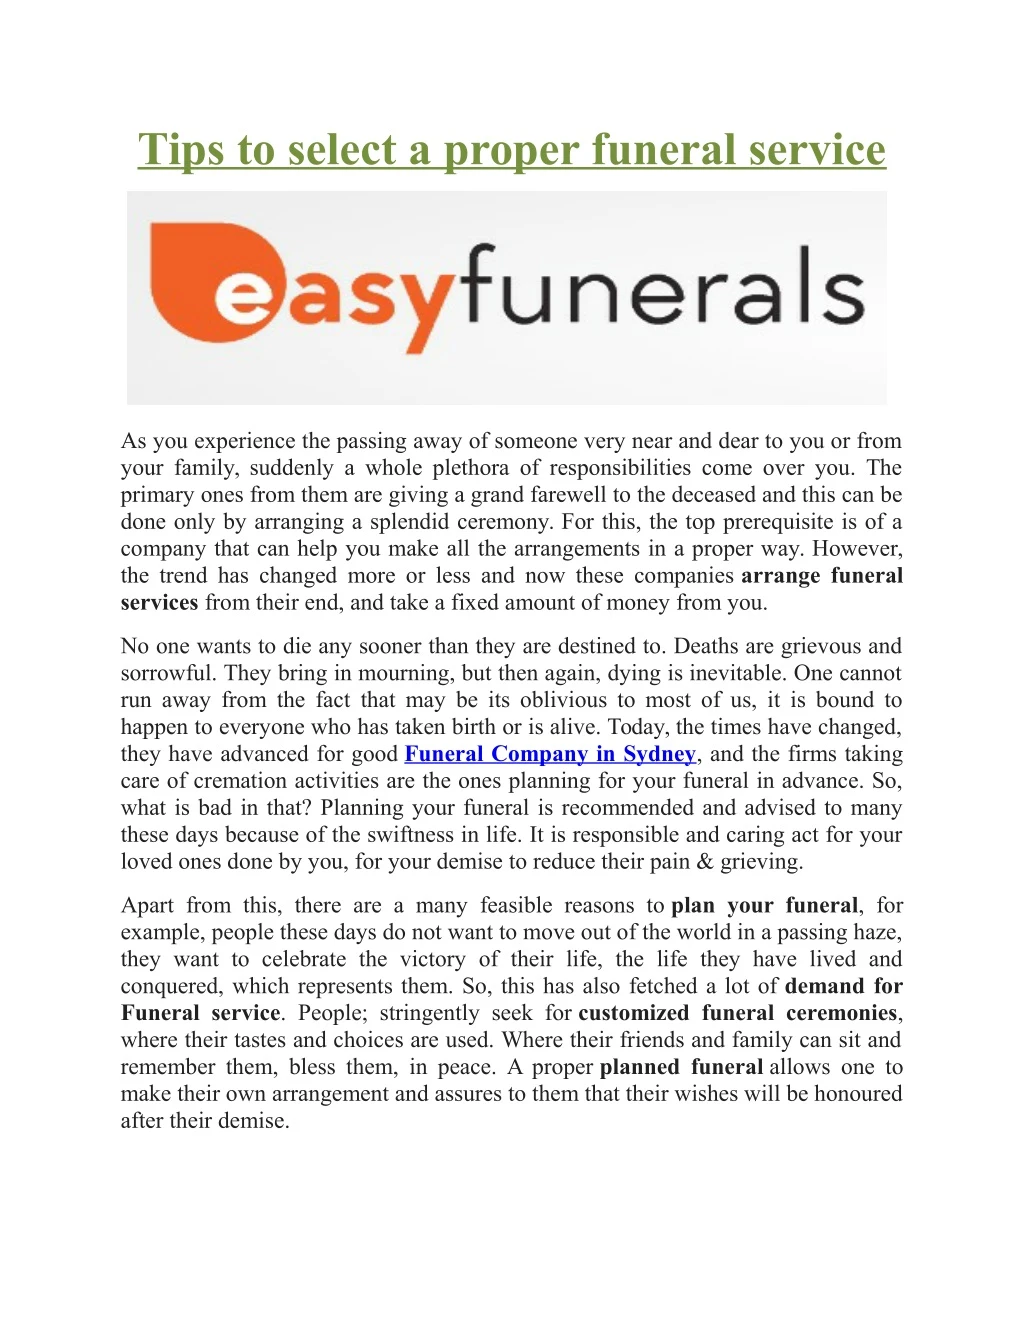 tips to select a proper funeral service